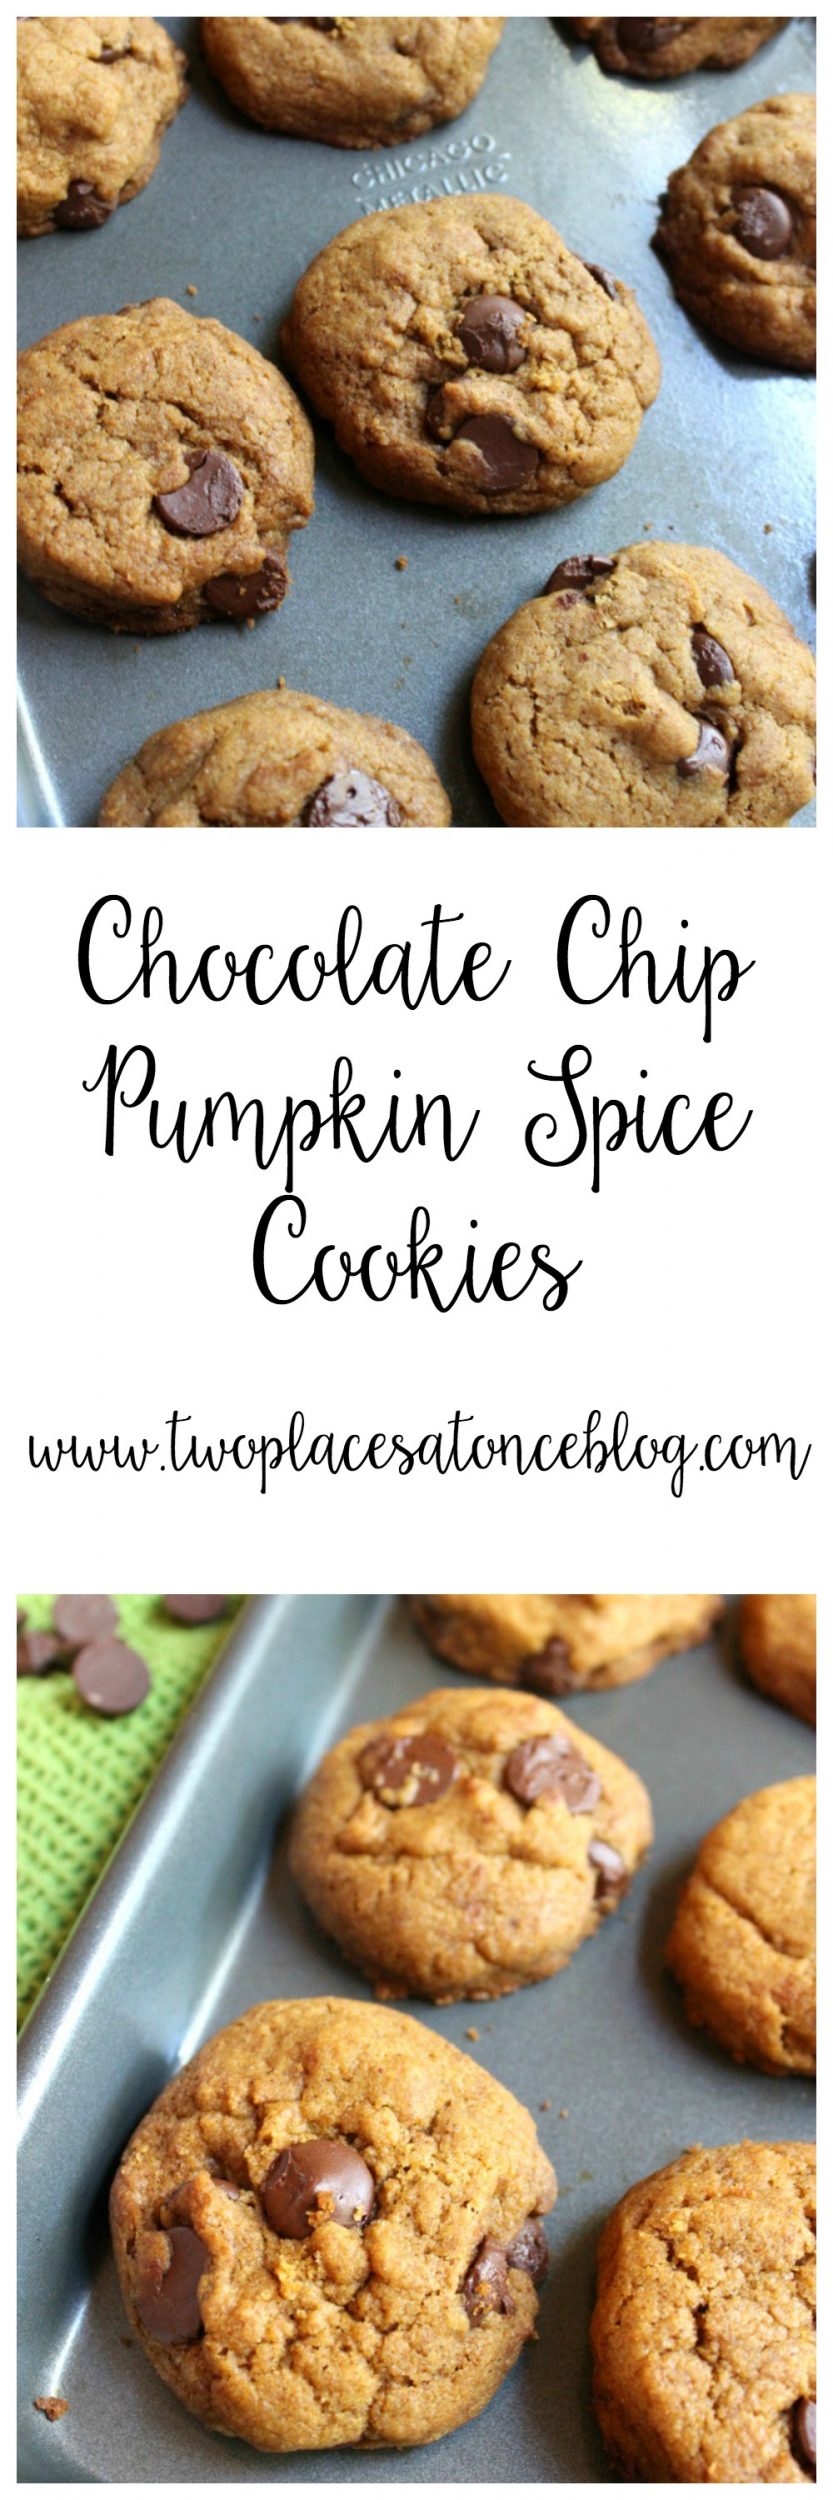 Chocolate Chip Pumpkin Spice Cookies | My Cooking Spot